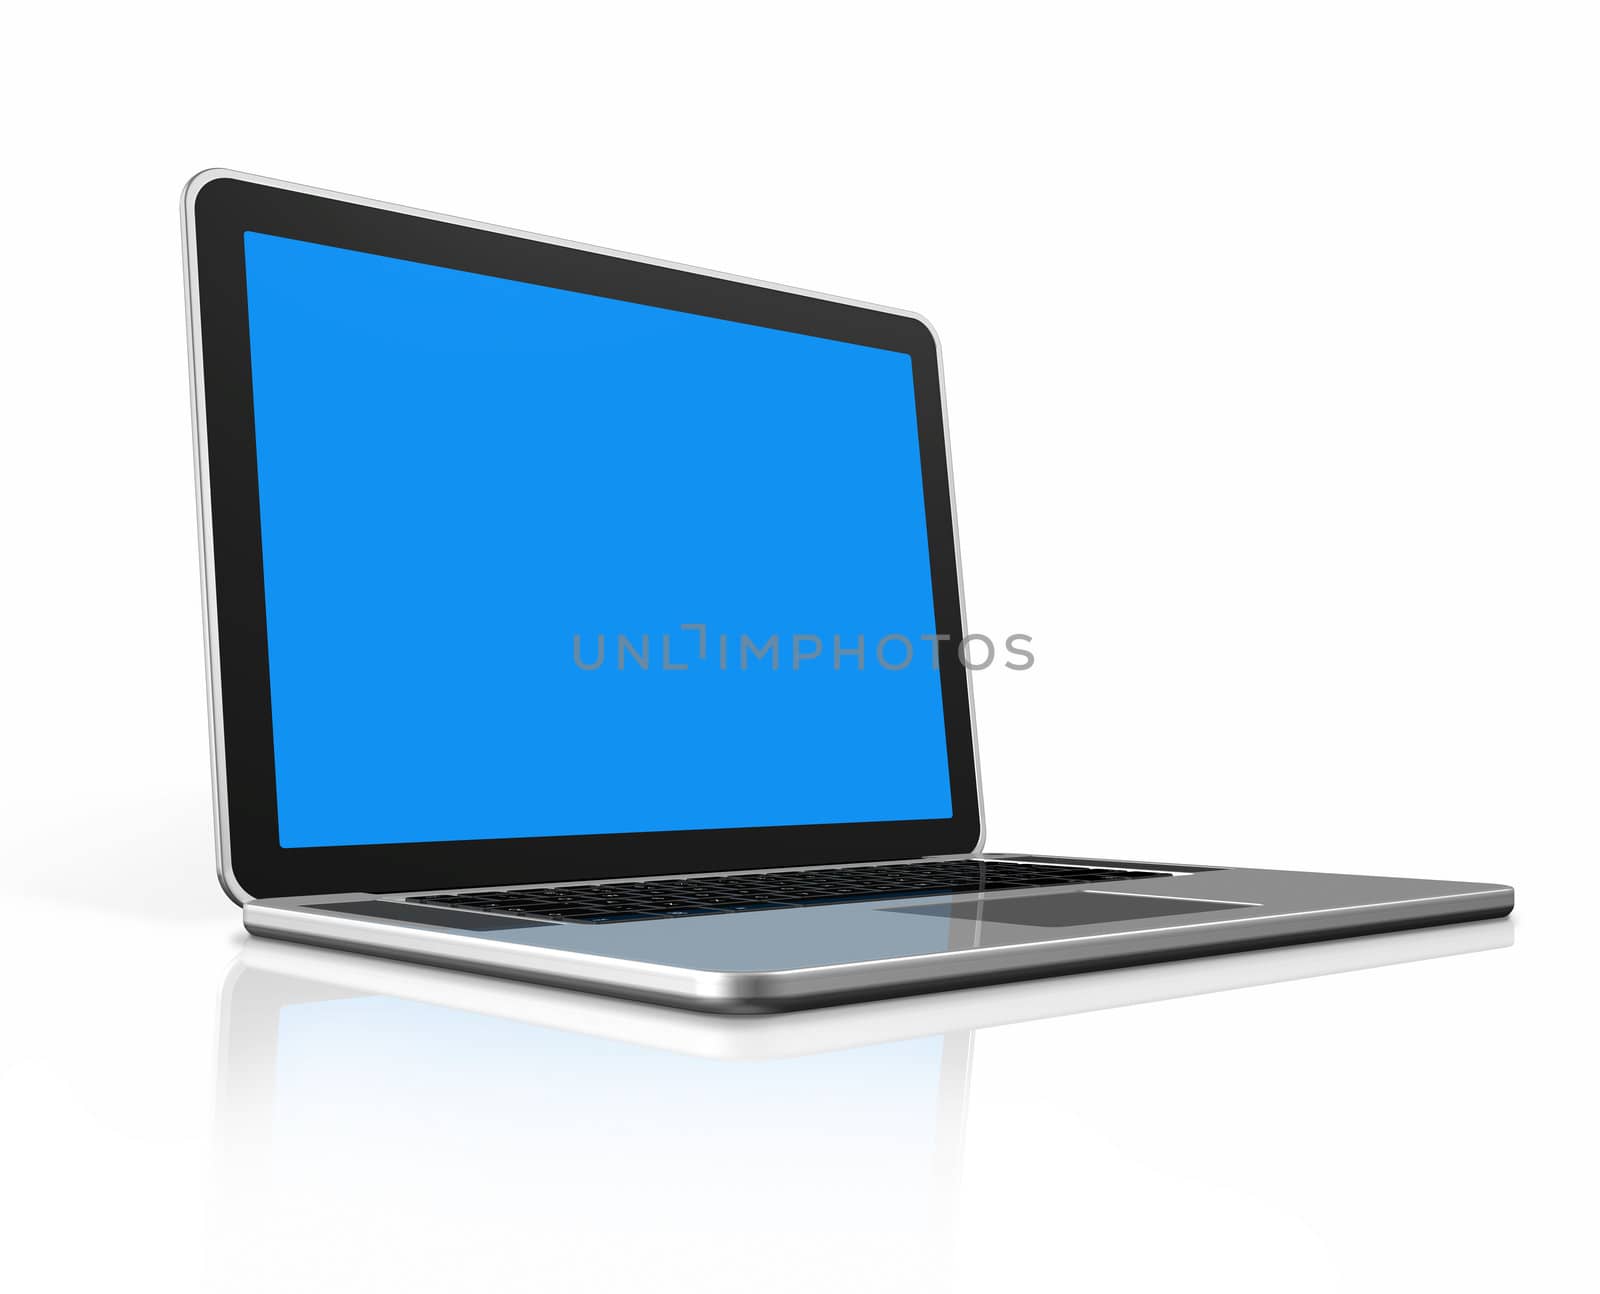 3D laptop computer isolated on white with clipping path